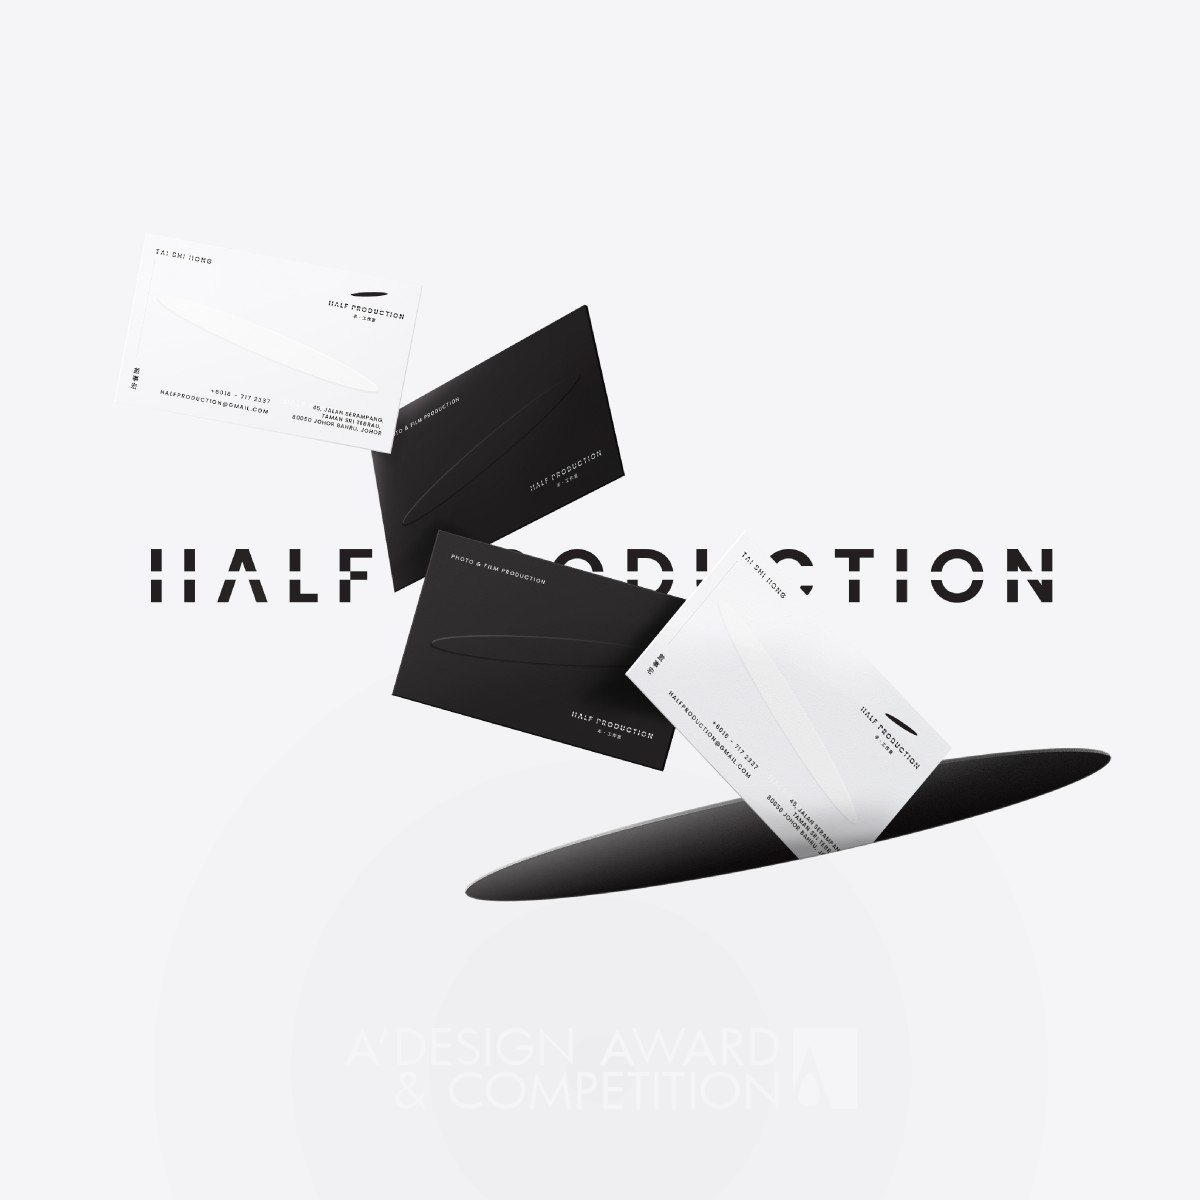 Half Production: A Unique Visual Identity for a Photography and Videography Studio